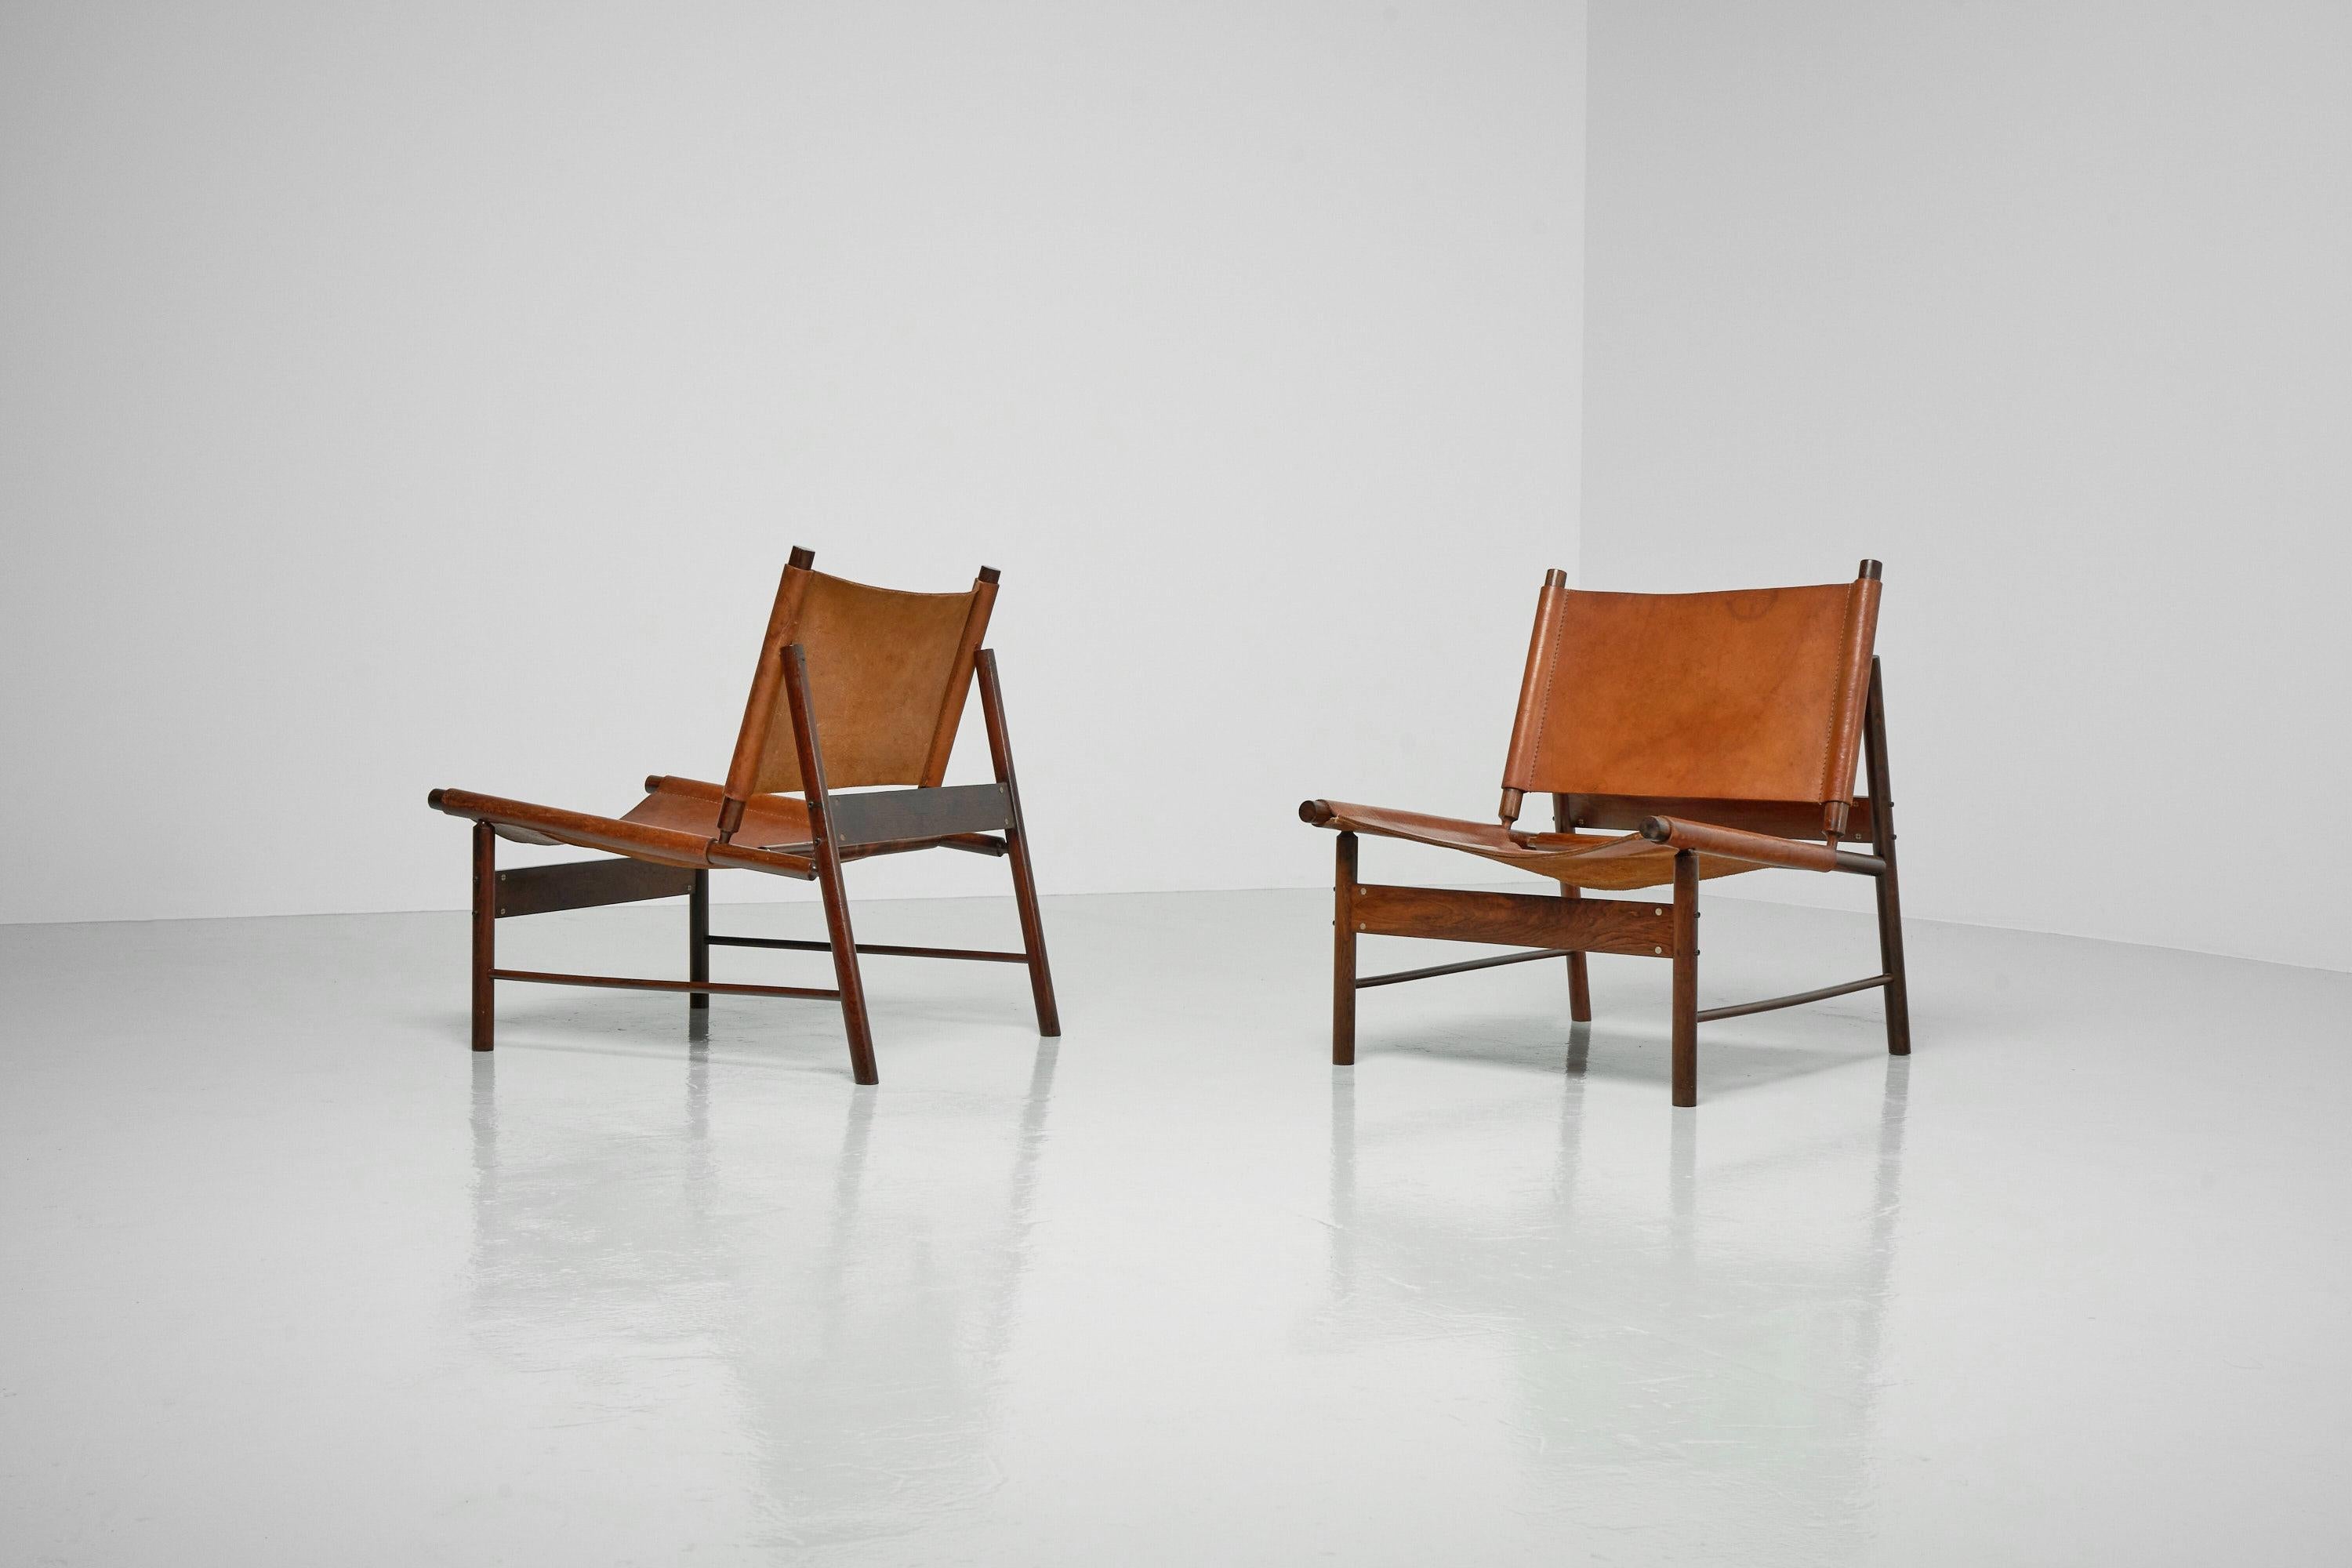 Rare pair of so-called Jockey chairs designed by Jorge Zalszupin and manufactured by his own company L’Atelier, Brazil 1959. The Jockey chair is one of L’Ateliers’ early models and is designed with mass production and efficient use of materials in